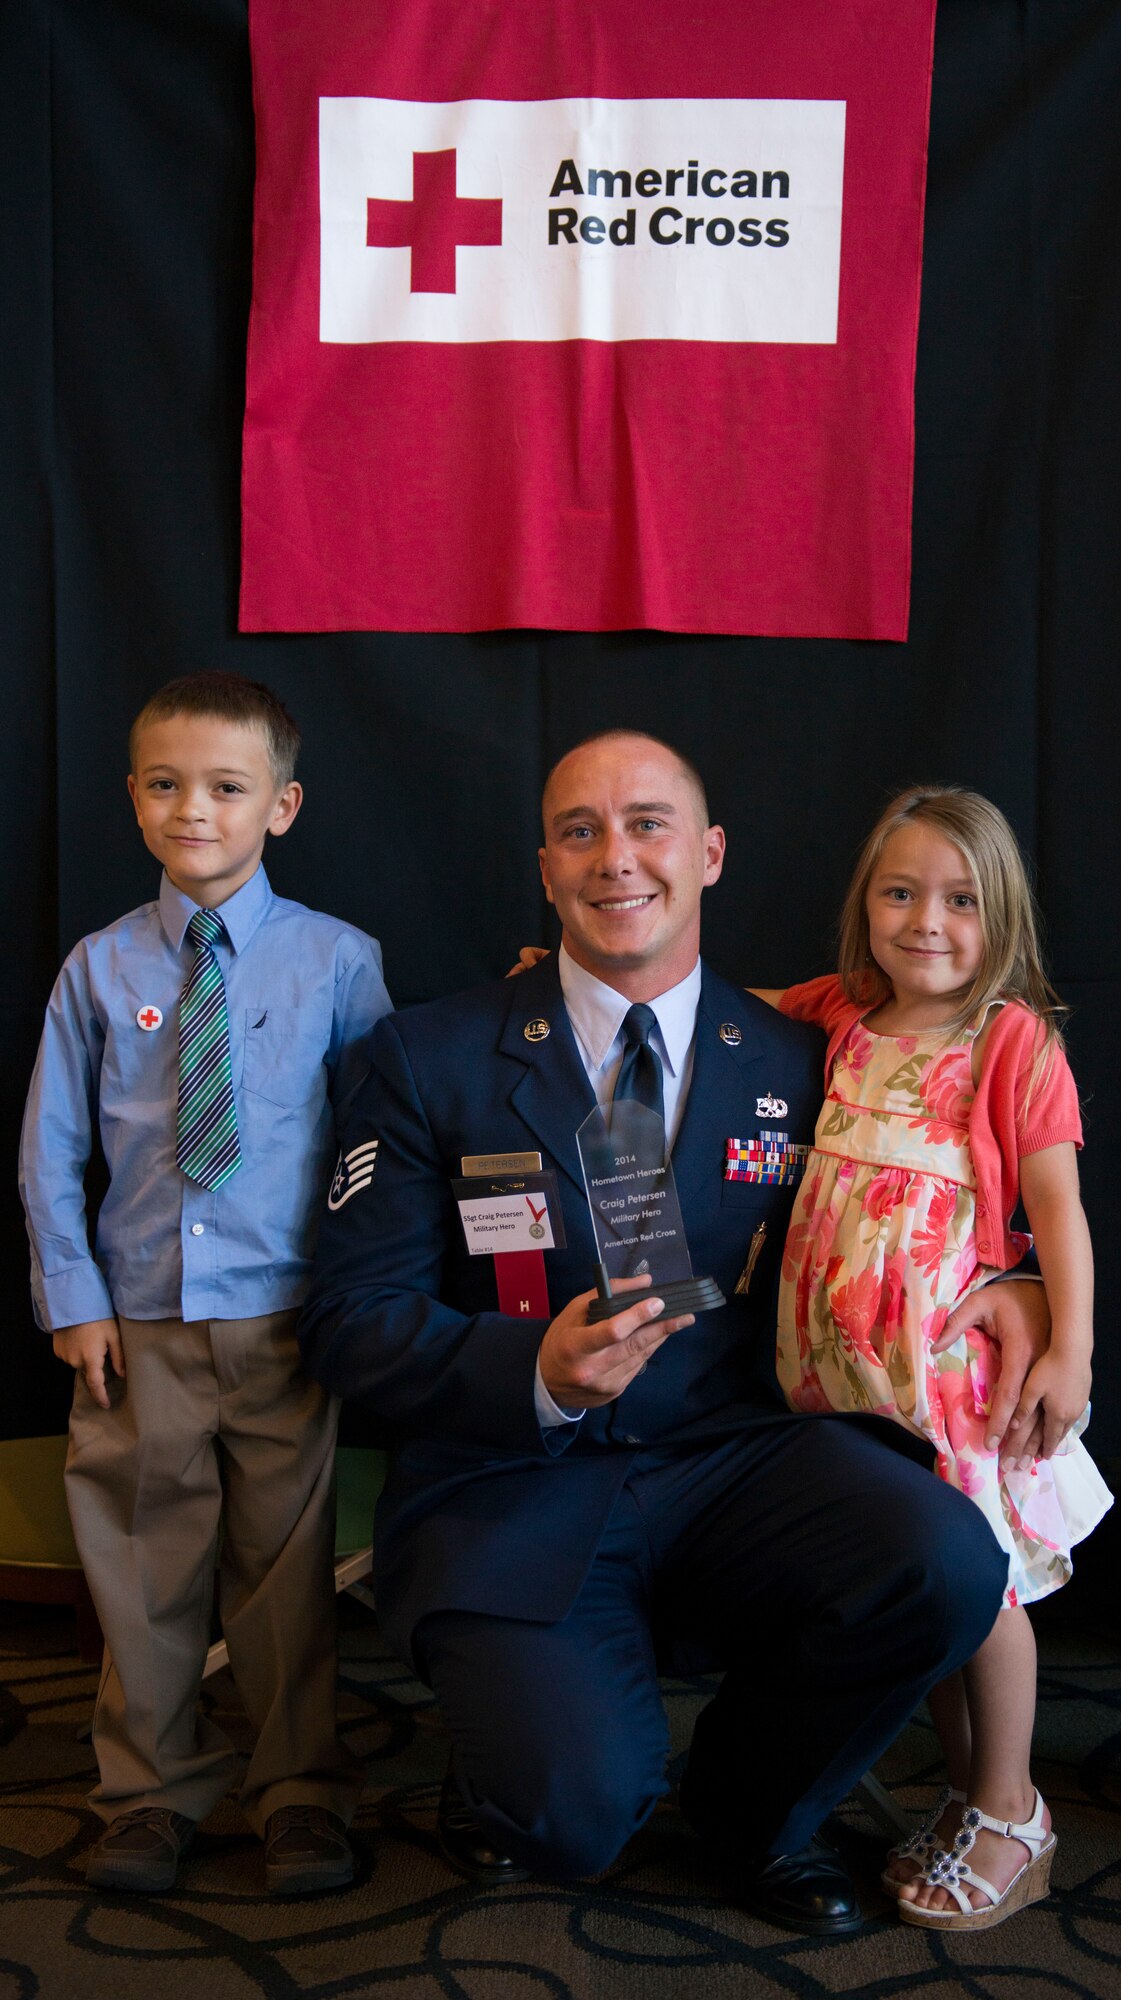 Staff Sgt. Craig Petersen poses with his son and daughter after the American Red Cross Hometown Hero Awards ceremony June 19, 2014, in Boise, Idaho. Petersen was honored for treating the wounds of a car crash victim until authorities arrived to the scene. (U.S. Air Force photo/Airman 1st Class Malissa Lott)